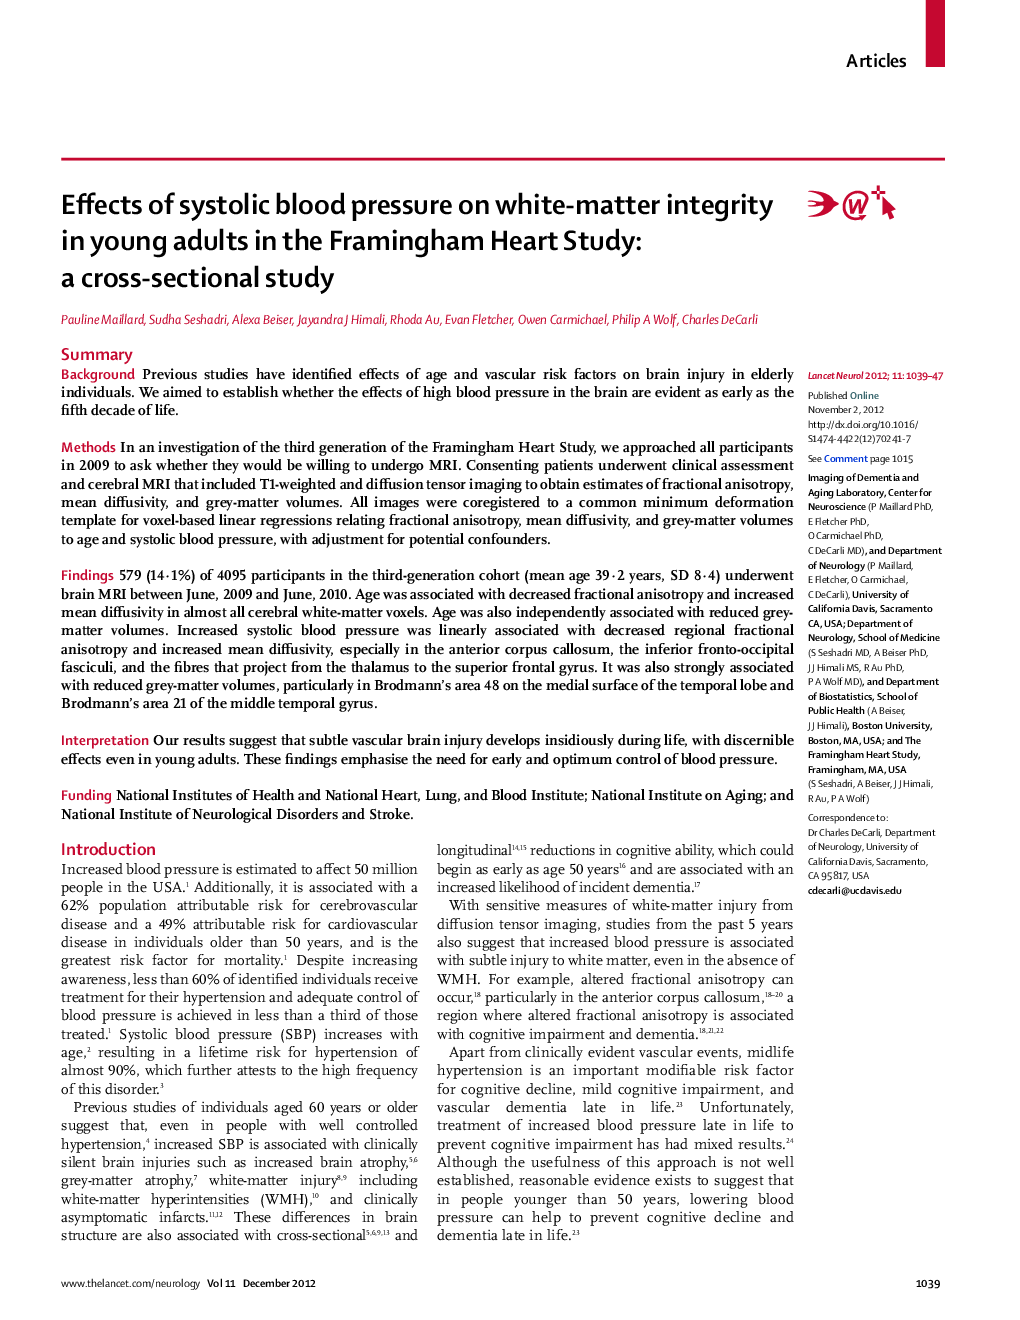 Effects of systolic blood pressure on white-matter integrity in young adults in the Framingham Heart Study: a cross-sectional study